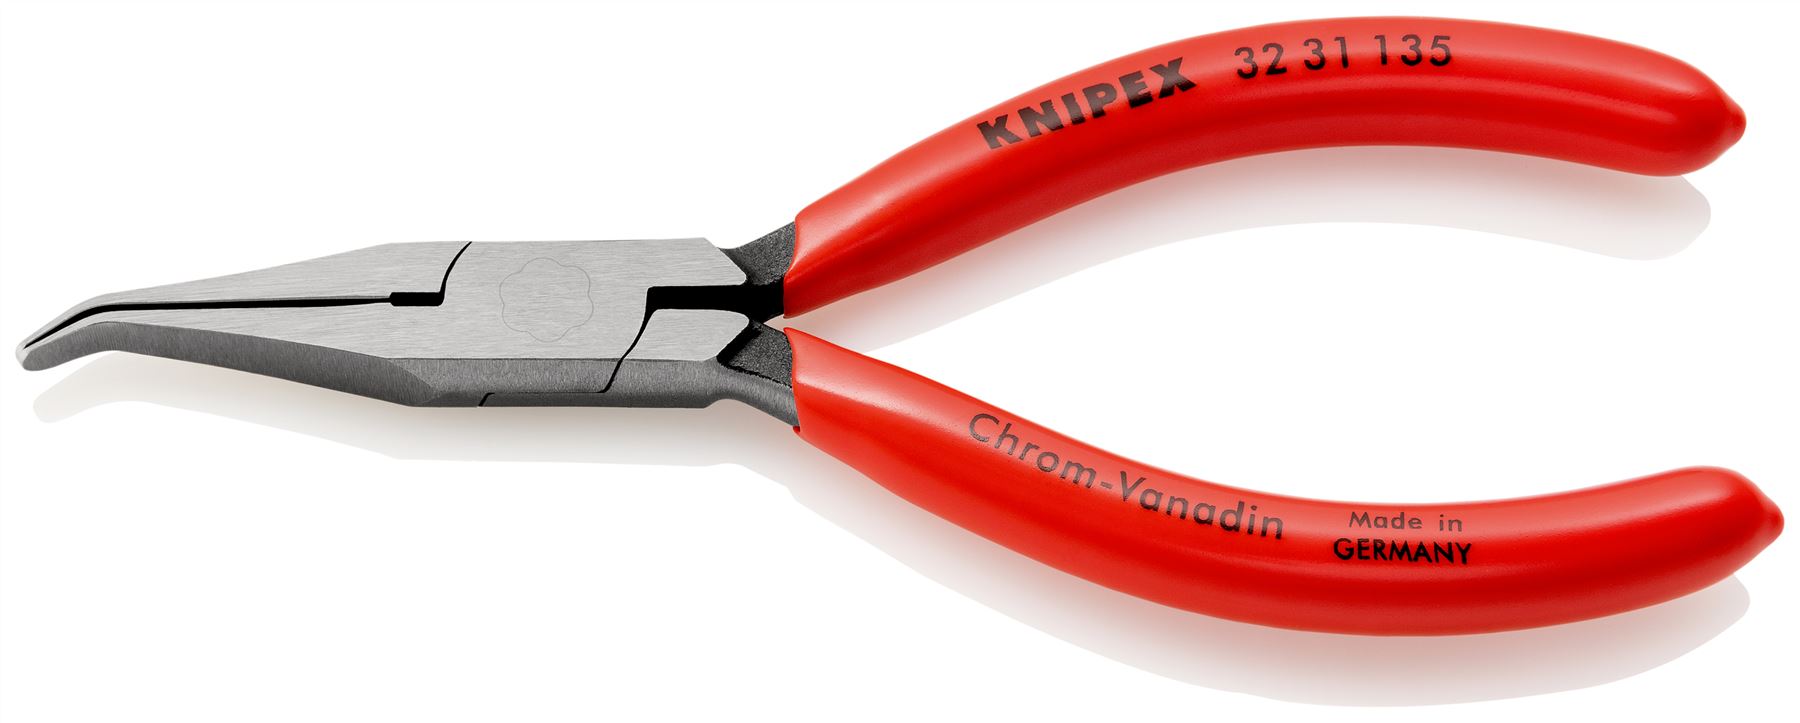 KNIPEX Relay Adjusting Gripping Pliers Bent Nose Plier 135mm Plastic Coated 32 31 135